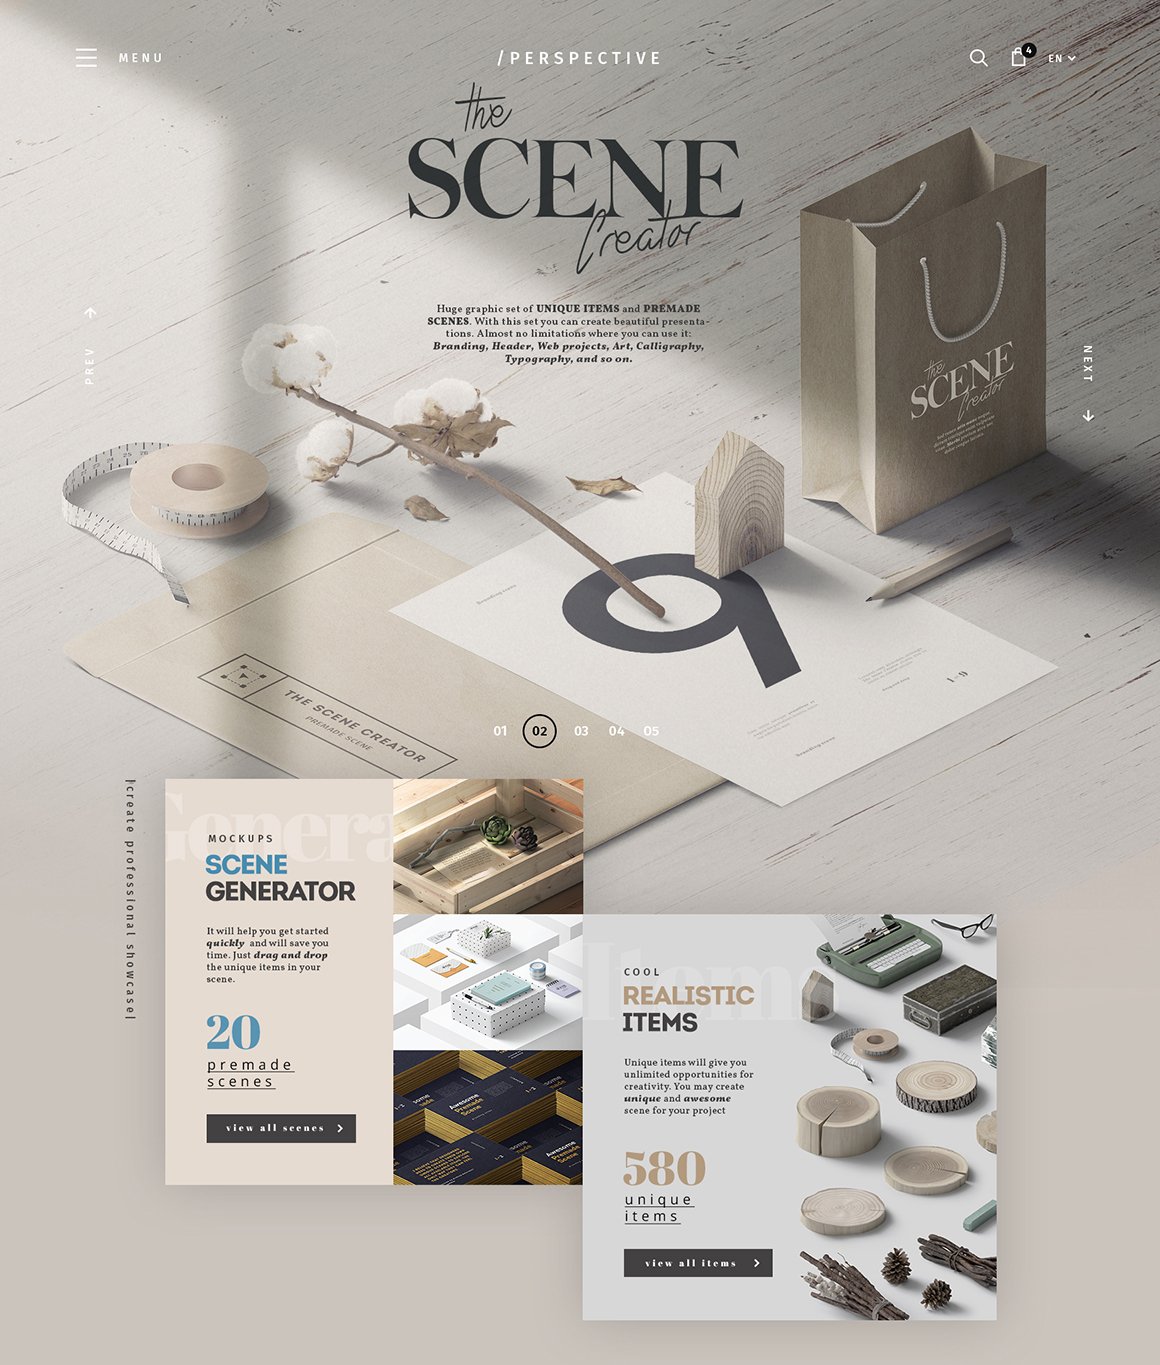 50%OFF The Scene Creator-Perspective preview image.